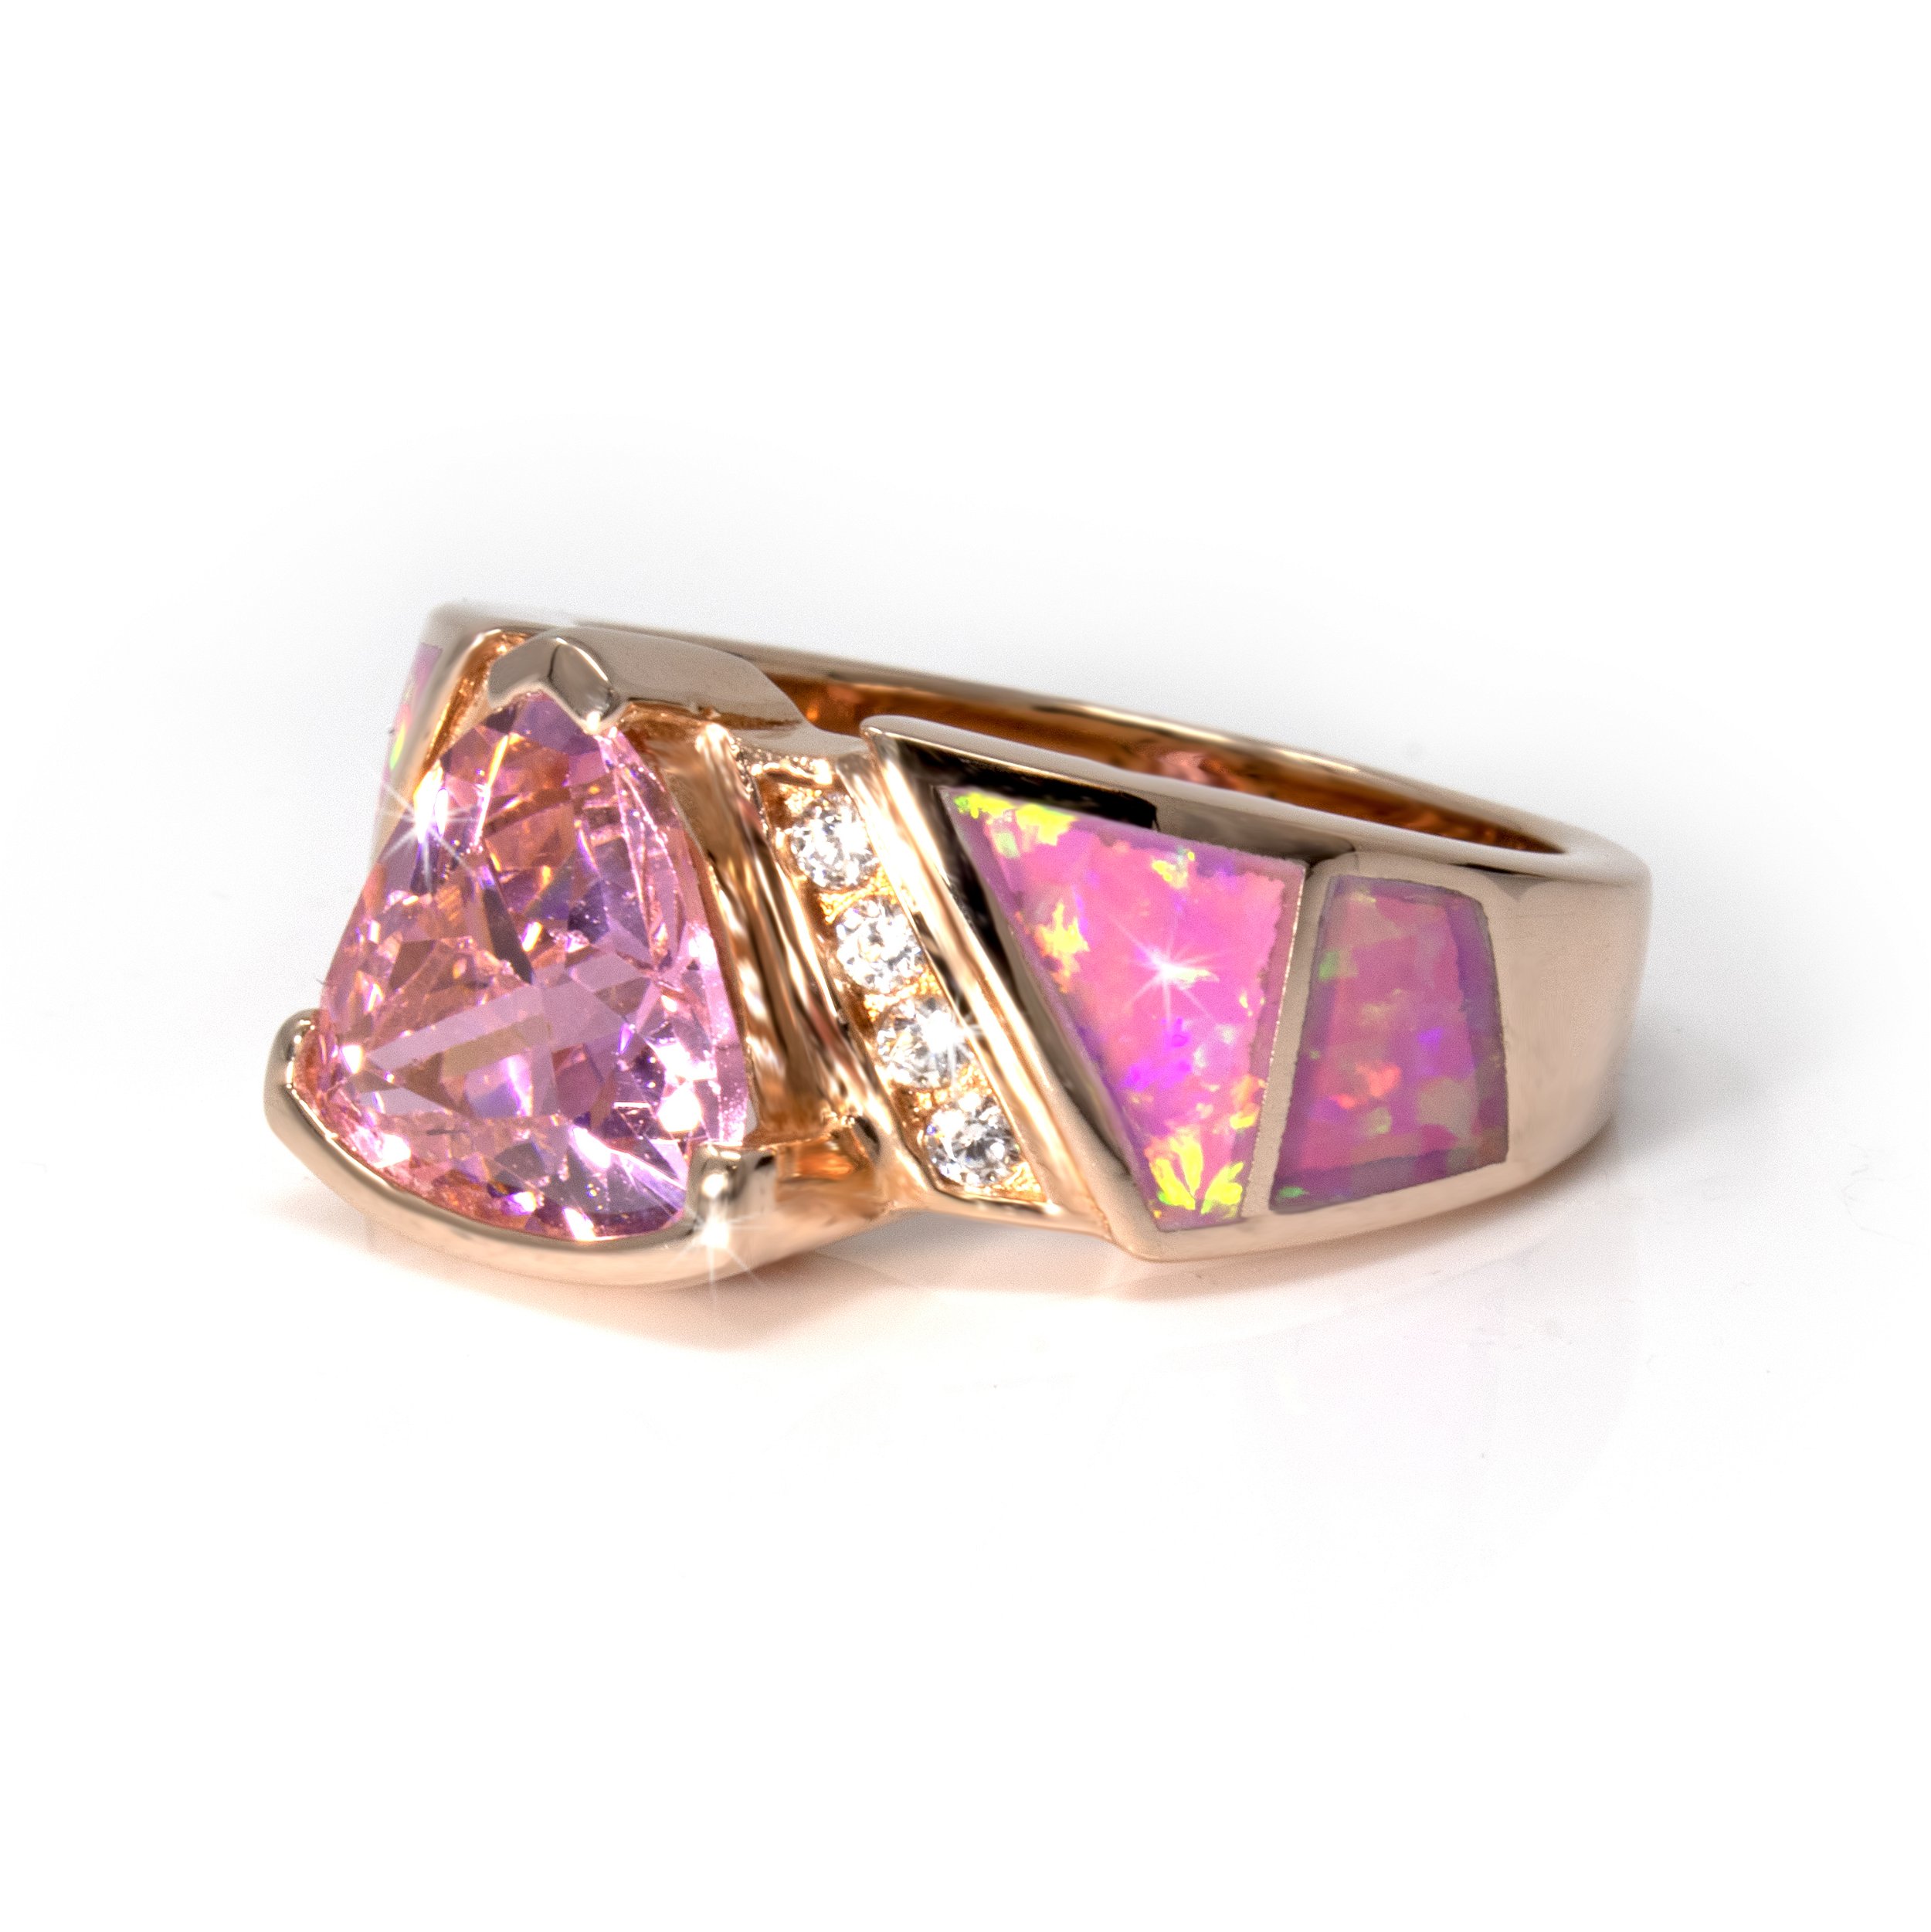 Pink Opal Ring with Rose Gold Overlay Size 7 - Inlaid Top Band With Pink Cz Trillion Set In Raised Sterling Silver Half Bezel & 2 White Cz Trios On Side